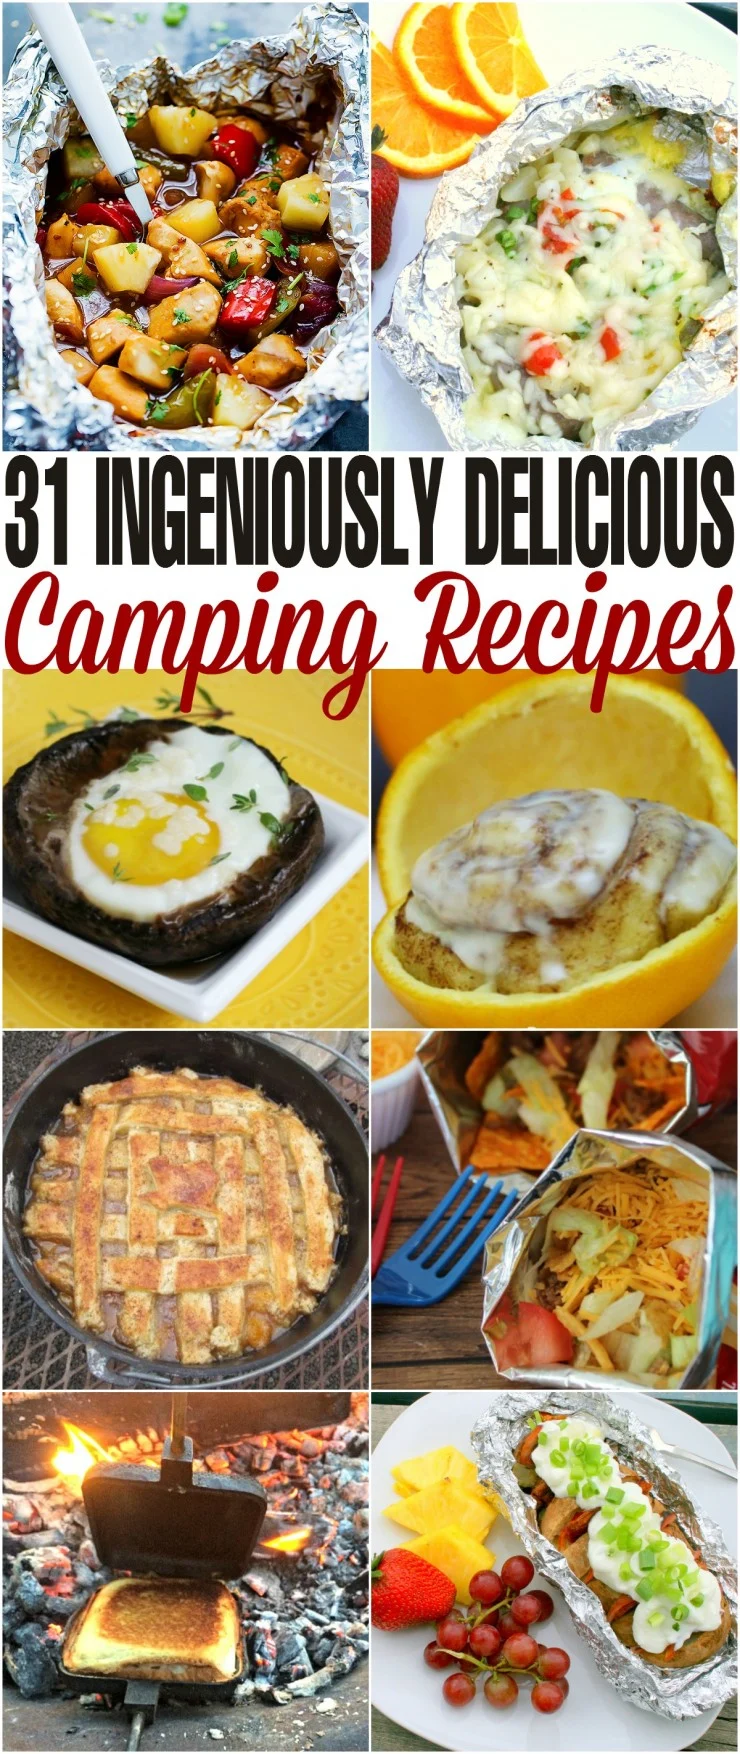 31 camping recipes from breakfast to dessert that are so ingenious they are sure to stun you with their ease and flavour! 